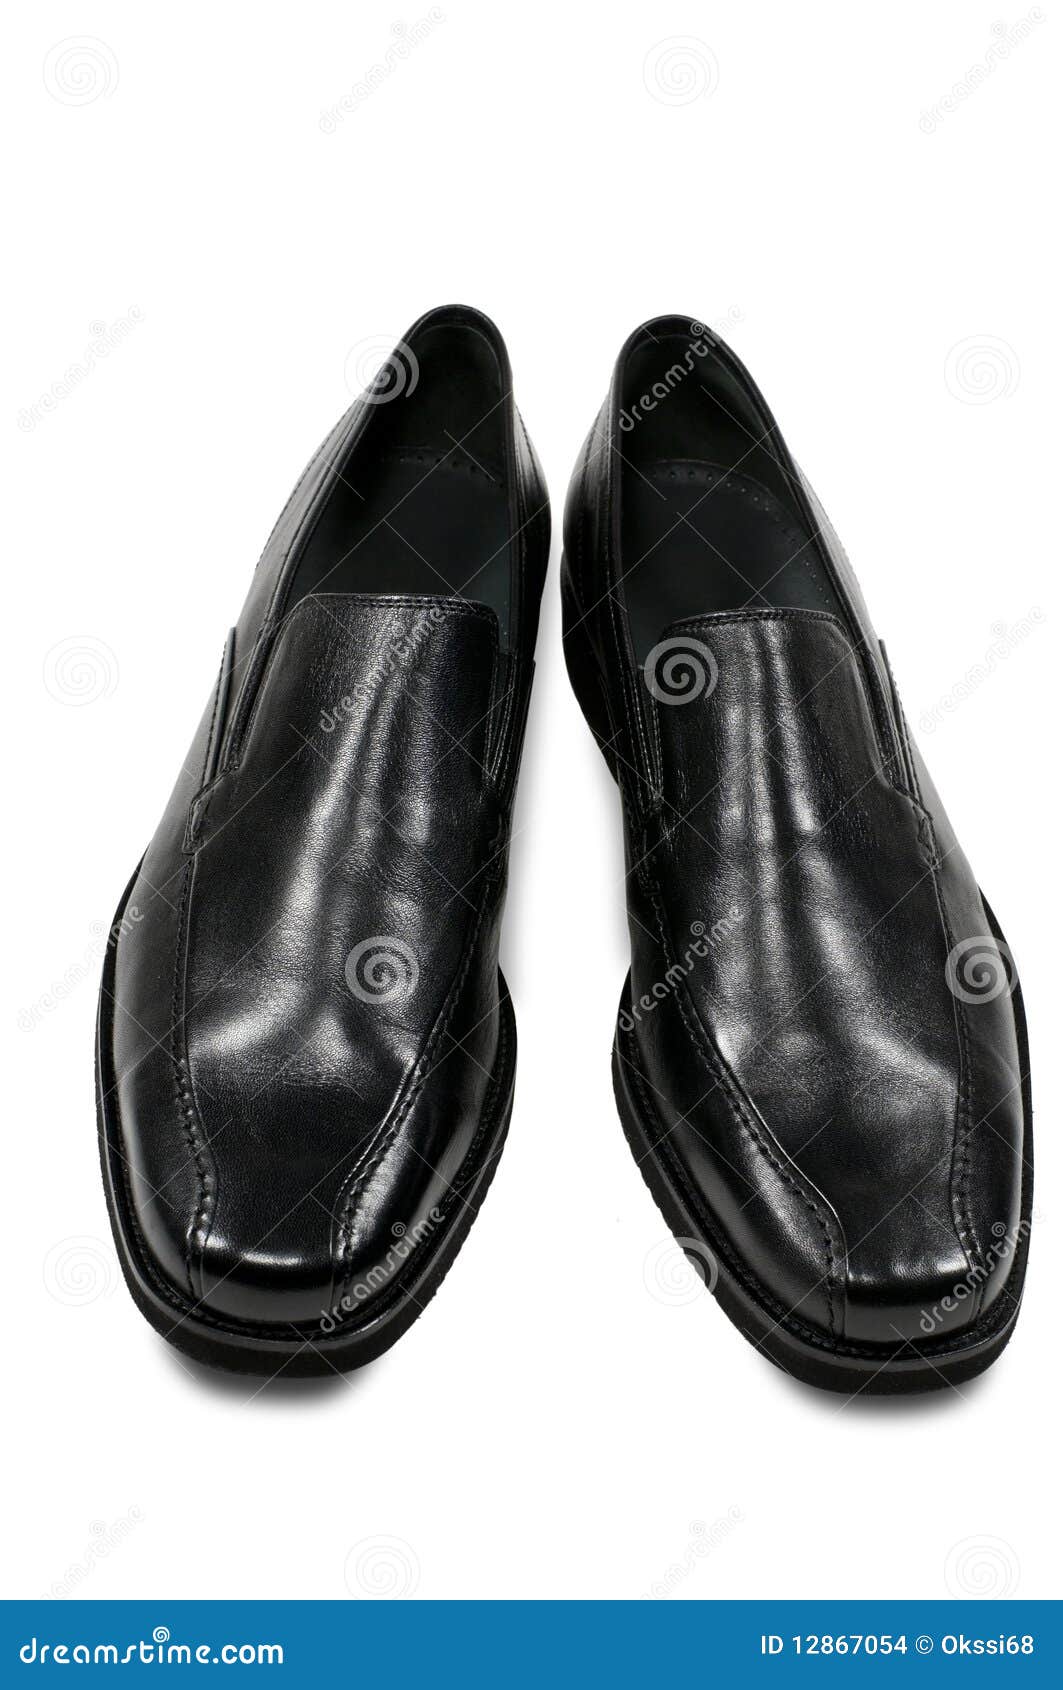 Black man s shoes stock photo. Image of patent, style - 12867054